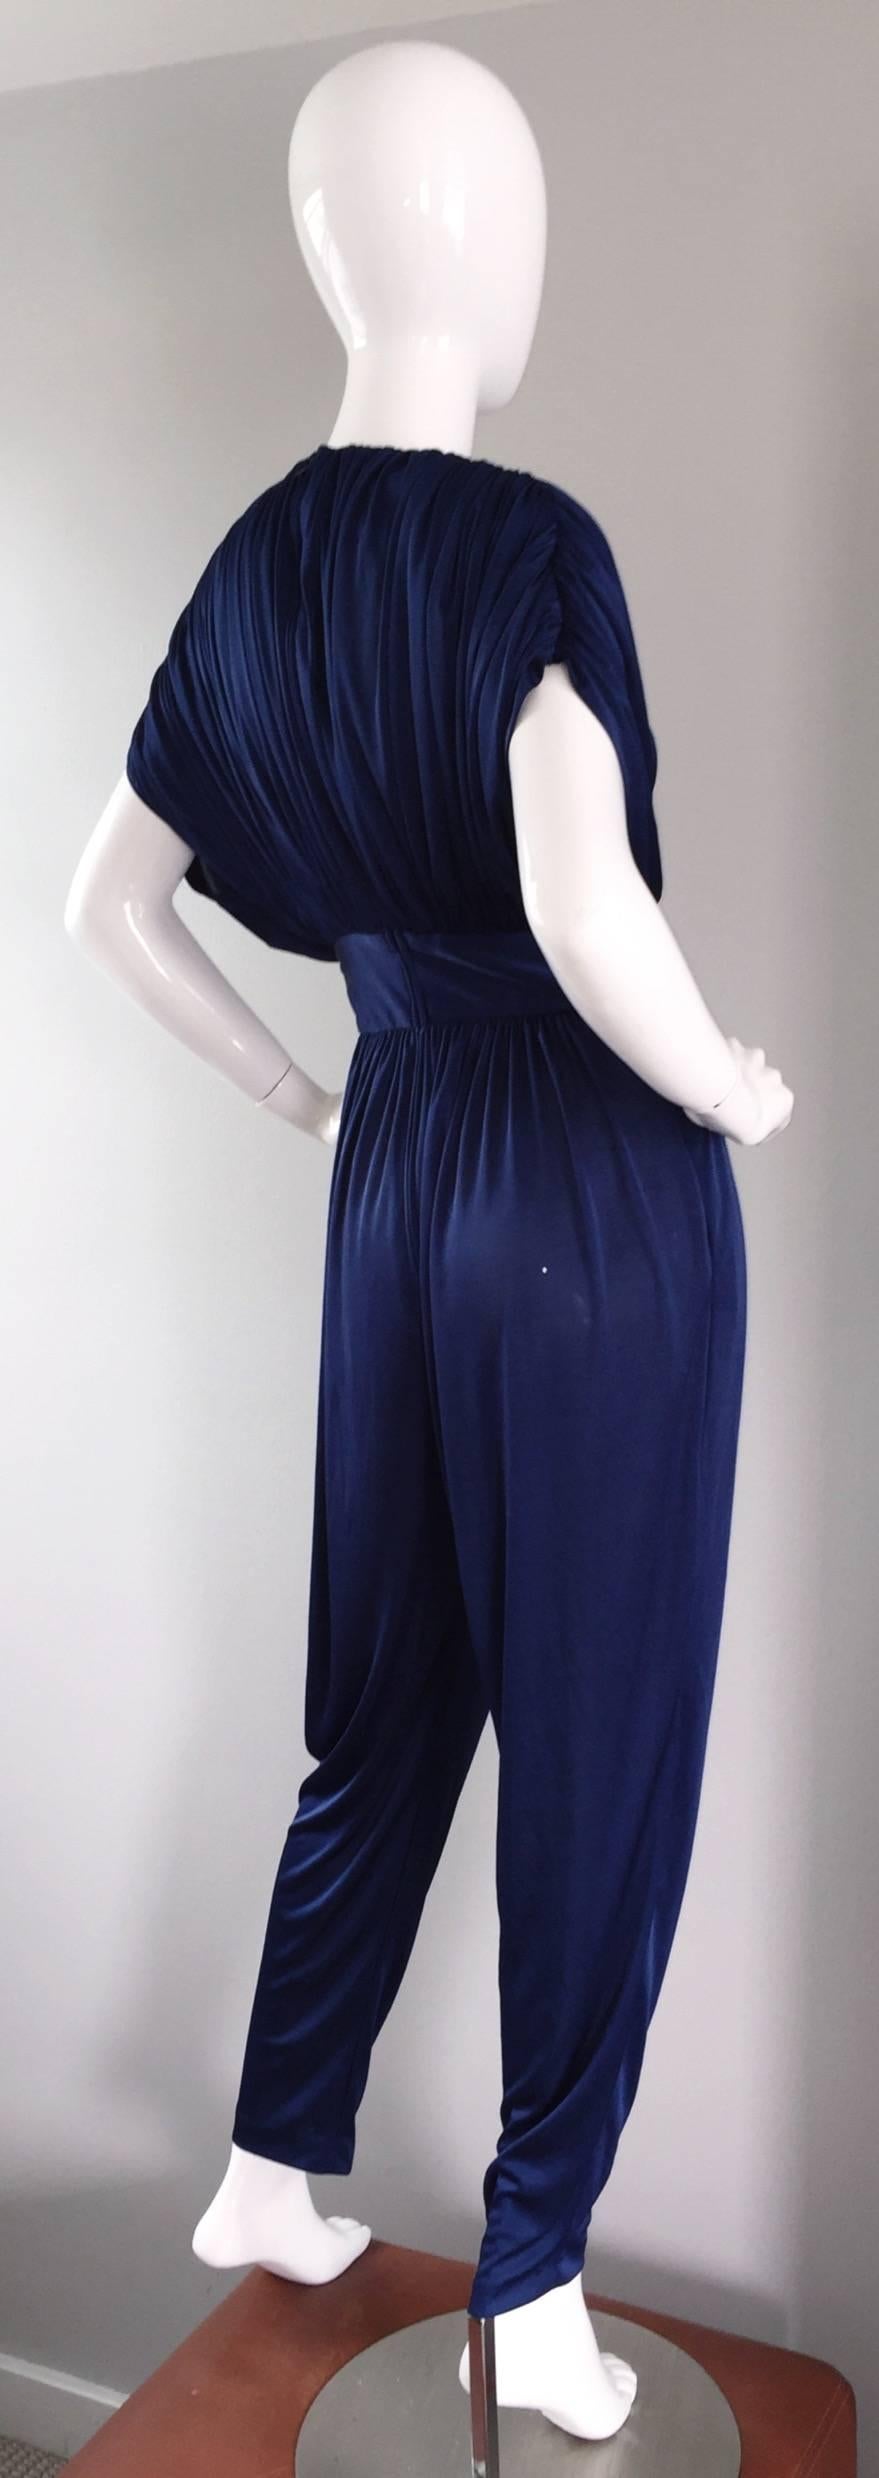 Incredible 1970s royal blue sequined jersey jumpsuit! Sexy, and very on trend. Ruched batwing sleeves (Dolman sleeves), so can fit a variety of bust sizes. Sequined waist. Reminds me of the Halston jumpsuit I once had. Hidden zipper up the back. In